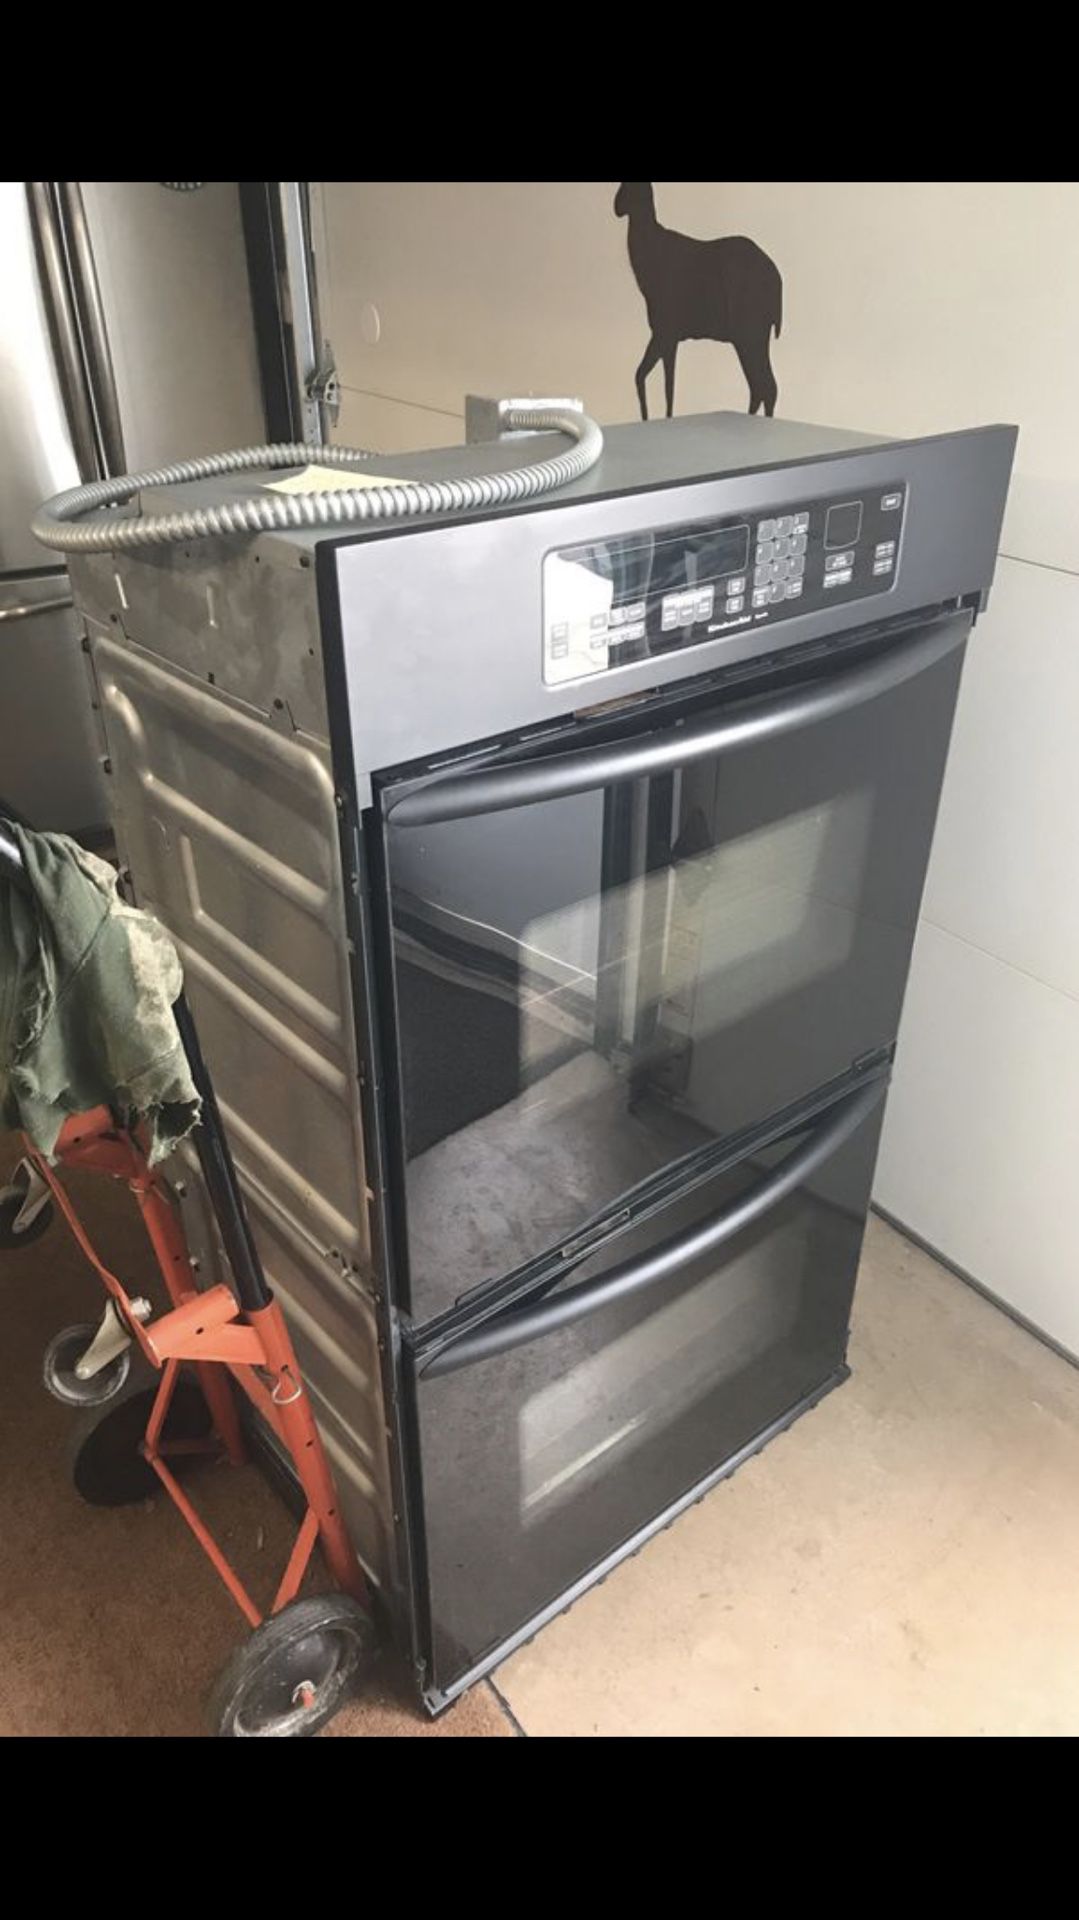 Double convention oven